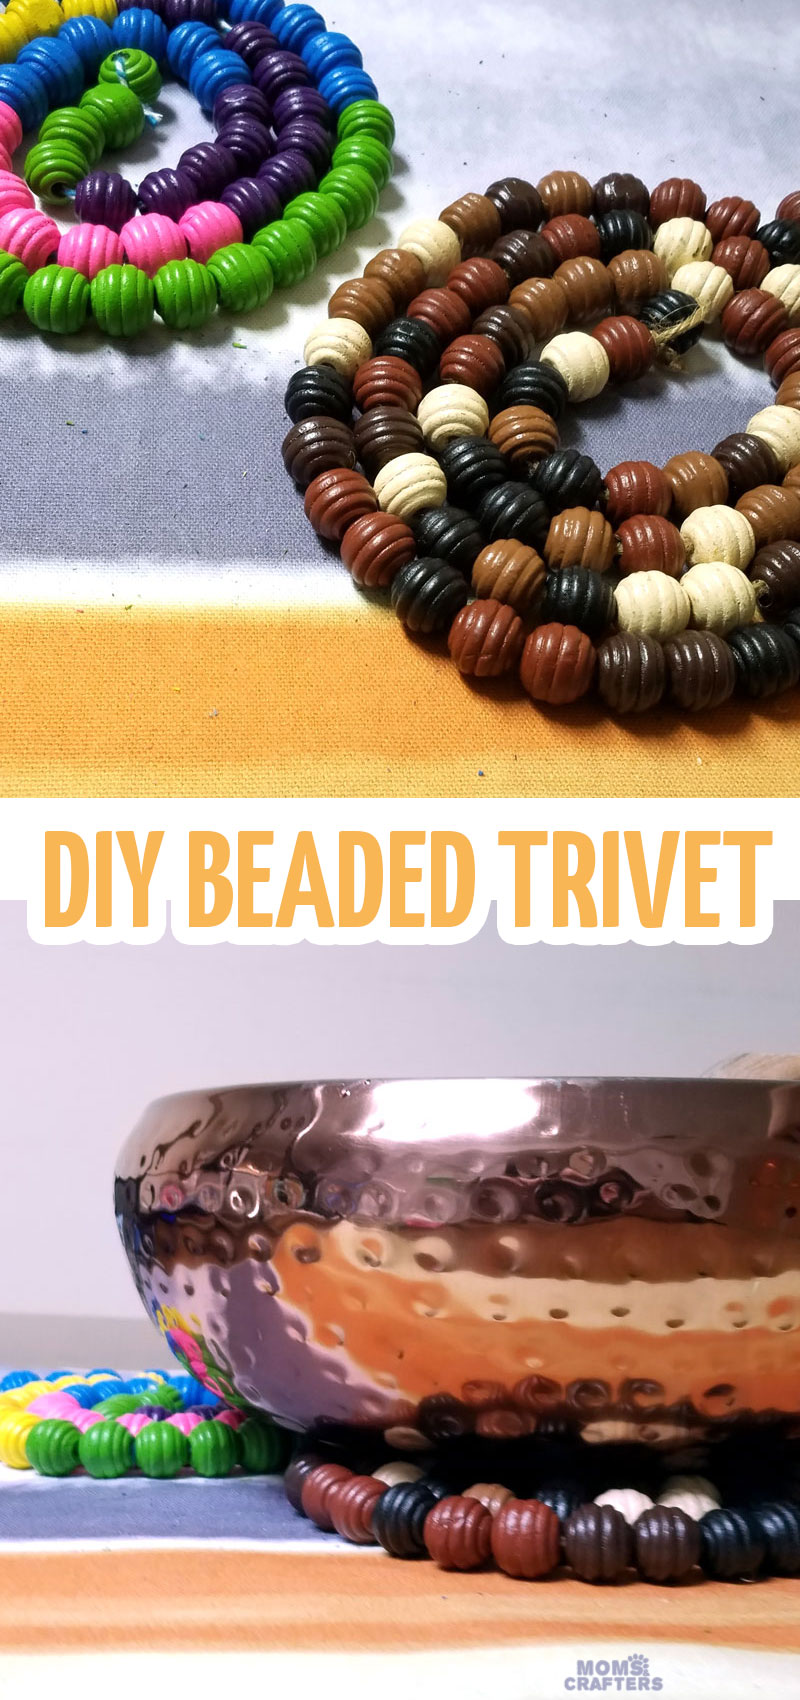 Make a super easy DIY trivet using wooden beads! This large coaster takes five minutes to make, can be made by young kids too, making it a practical kid-made gift idea. It's also durable and the wooden beads makes this wooden trivet really work to protect your surface! Perfect mother's day gift, or to make for yourself.